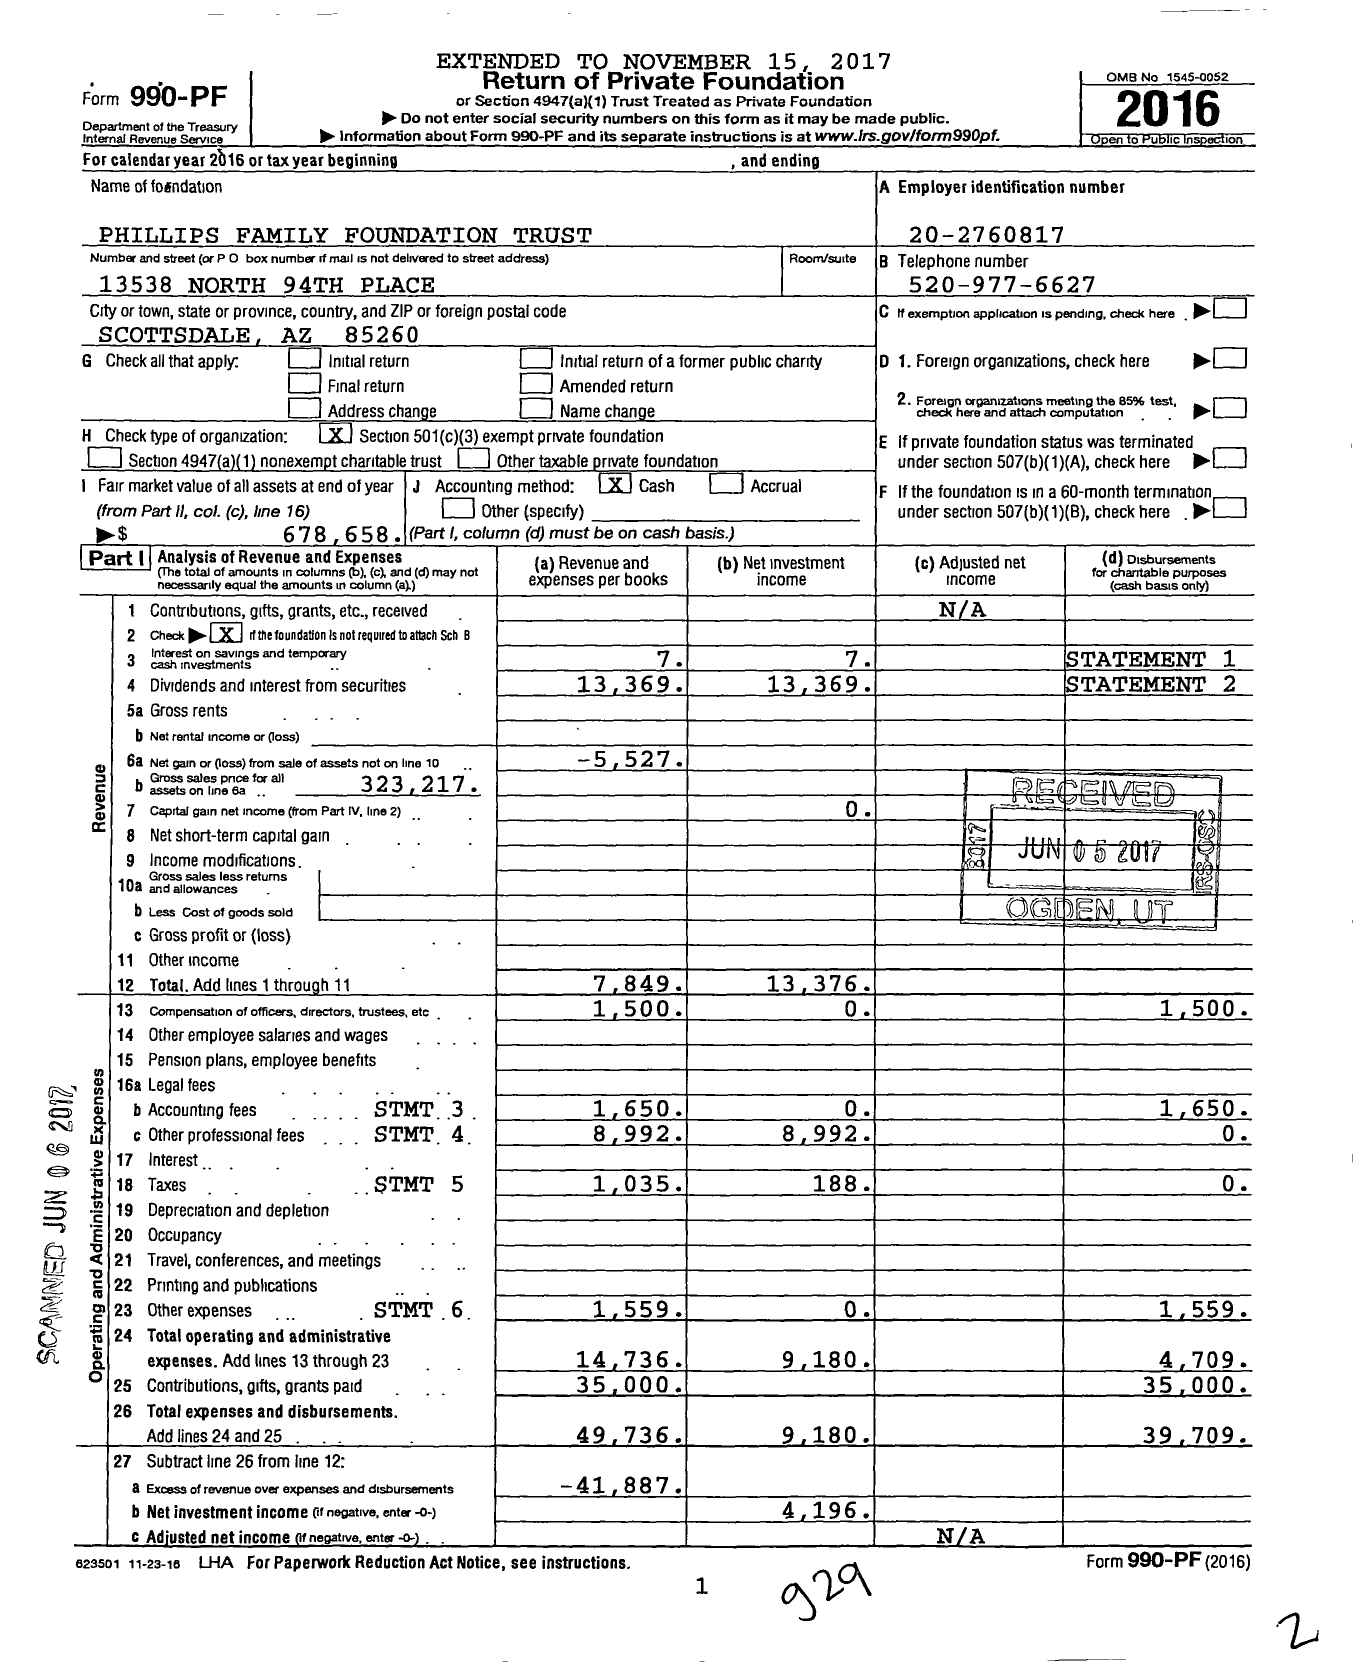 Image of first page of 2016 Form 990PF for Phillips Family Foundation Trust